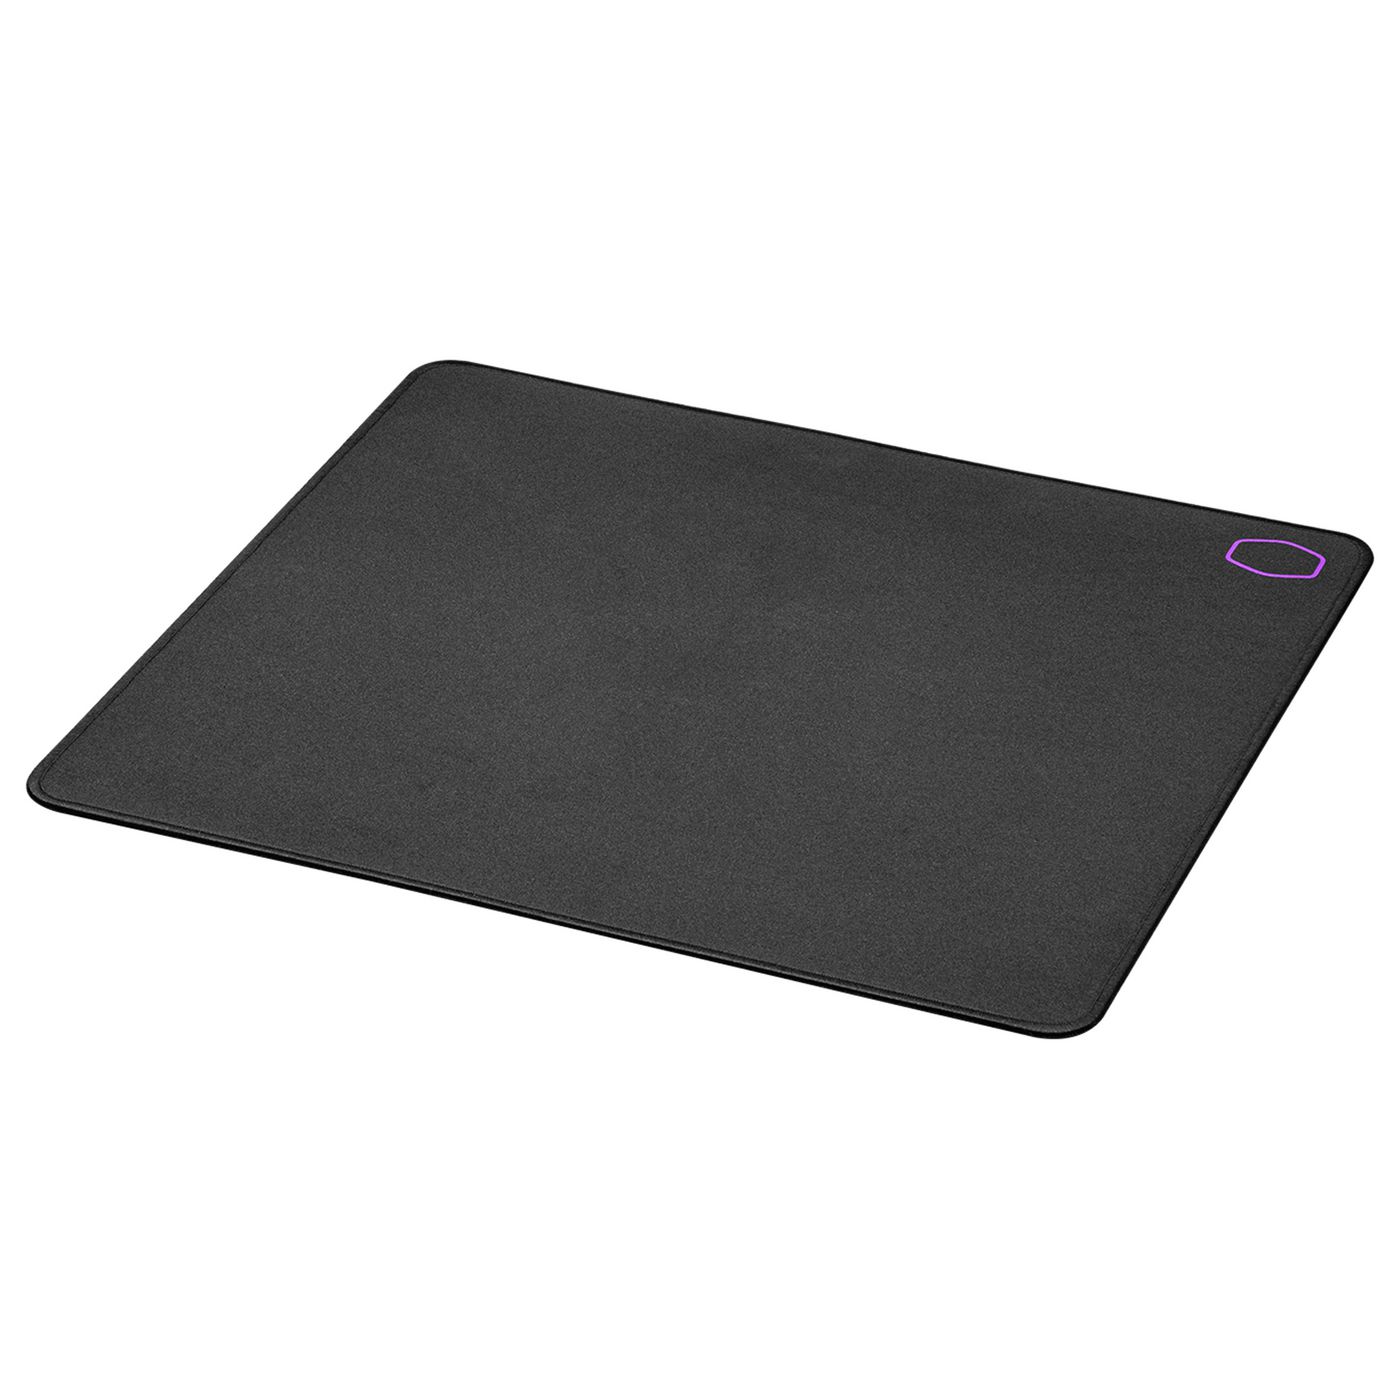 Cooler-Master MP-511-CBLC1 W128274640 Gaming Mp511 Gaming Mouse Pad 